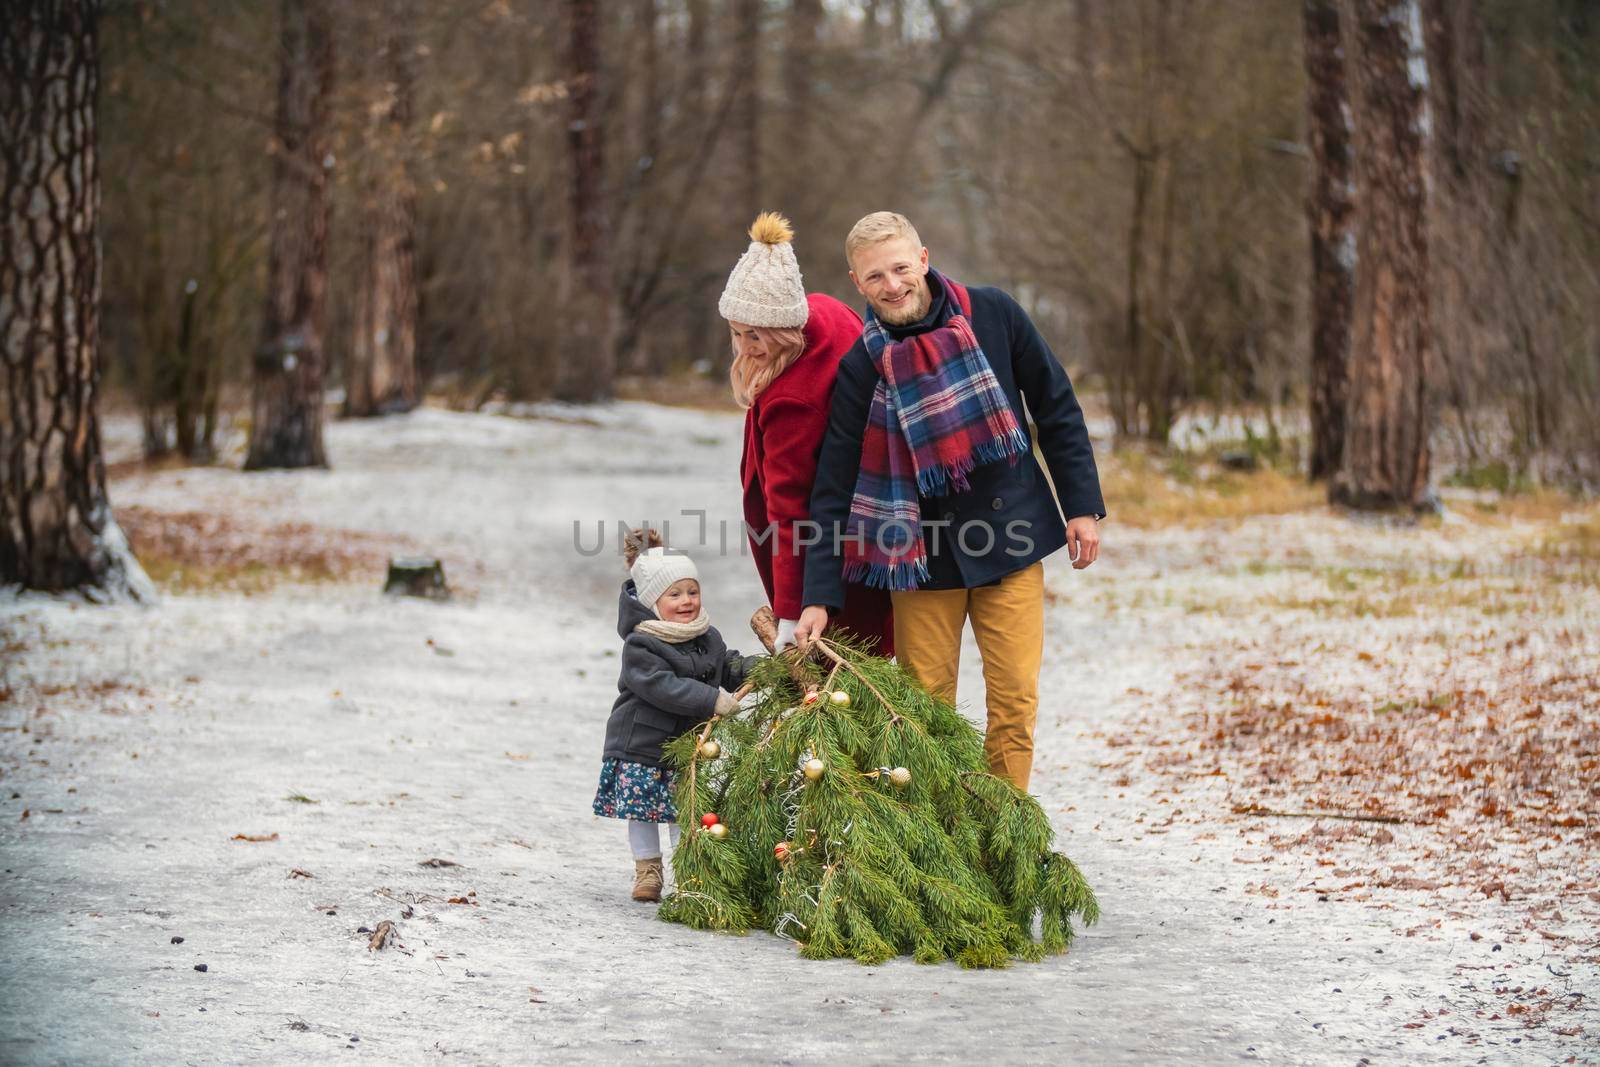 the family drags the tree behind them by zokov